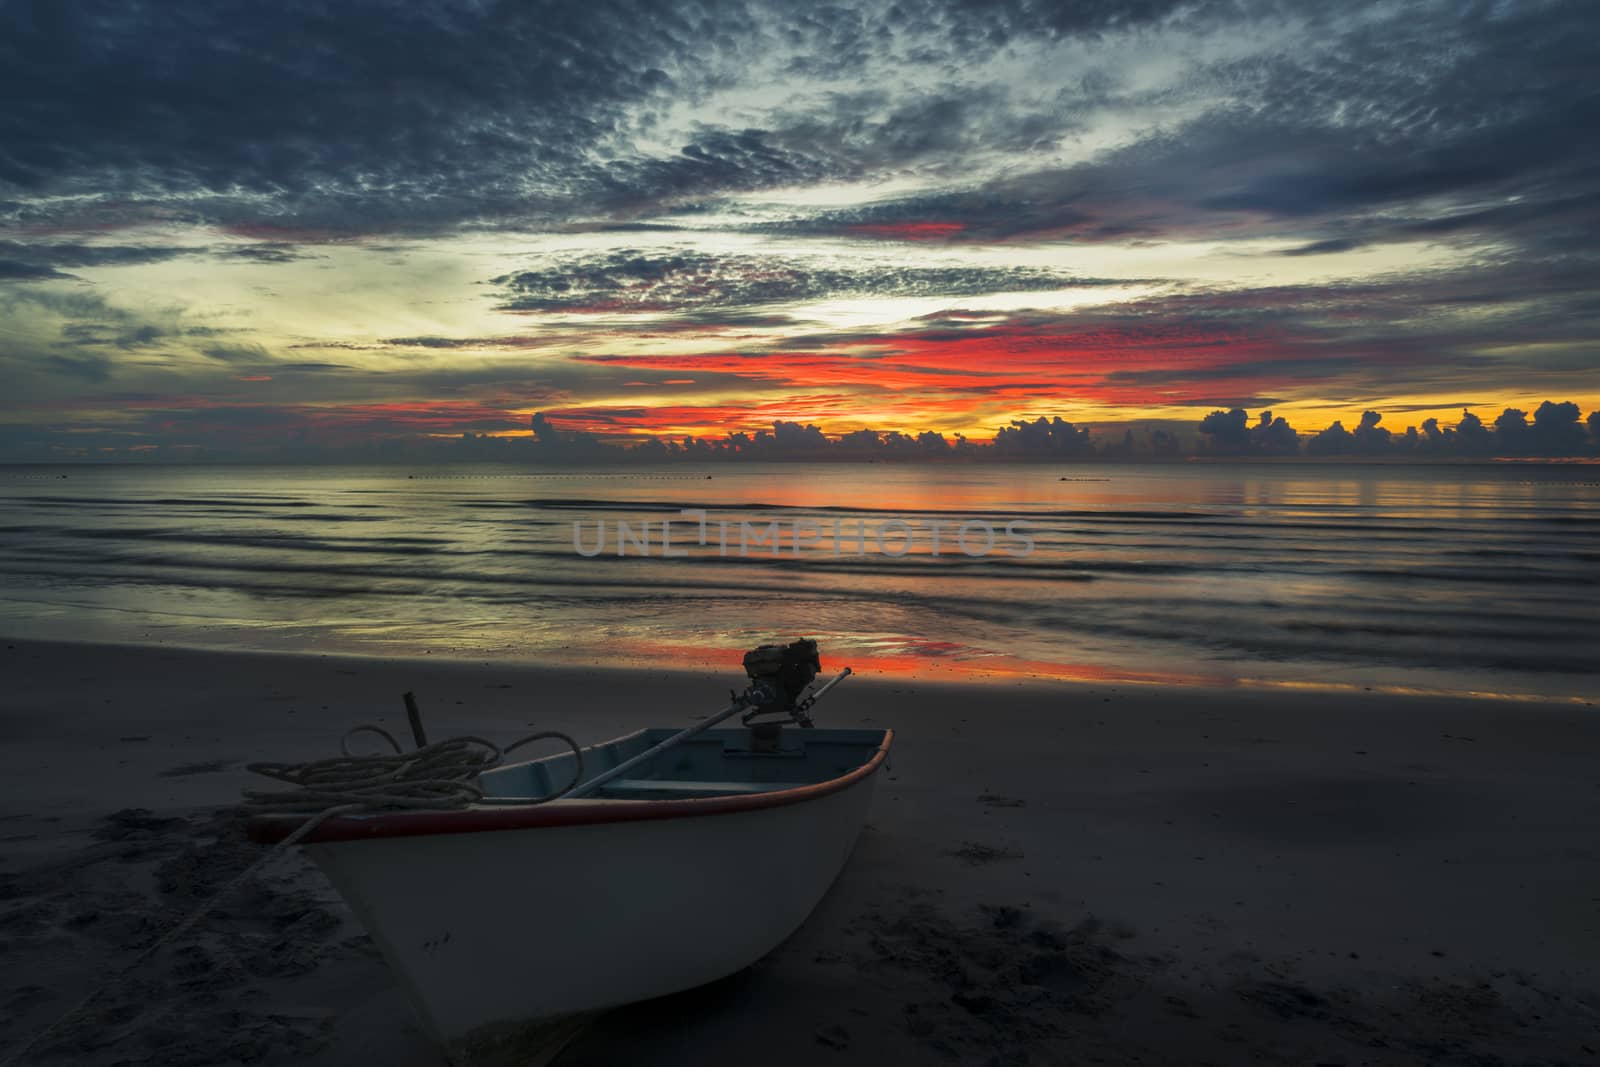 A beautiful dawn on a topical beach with a boat.